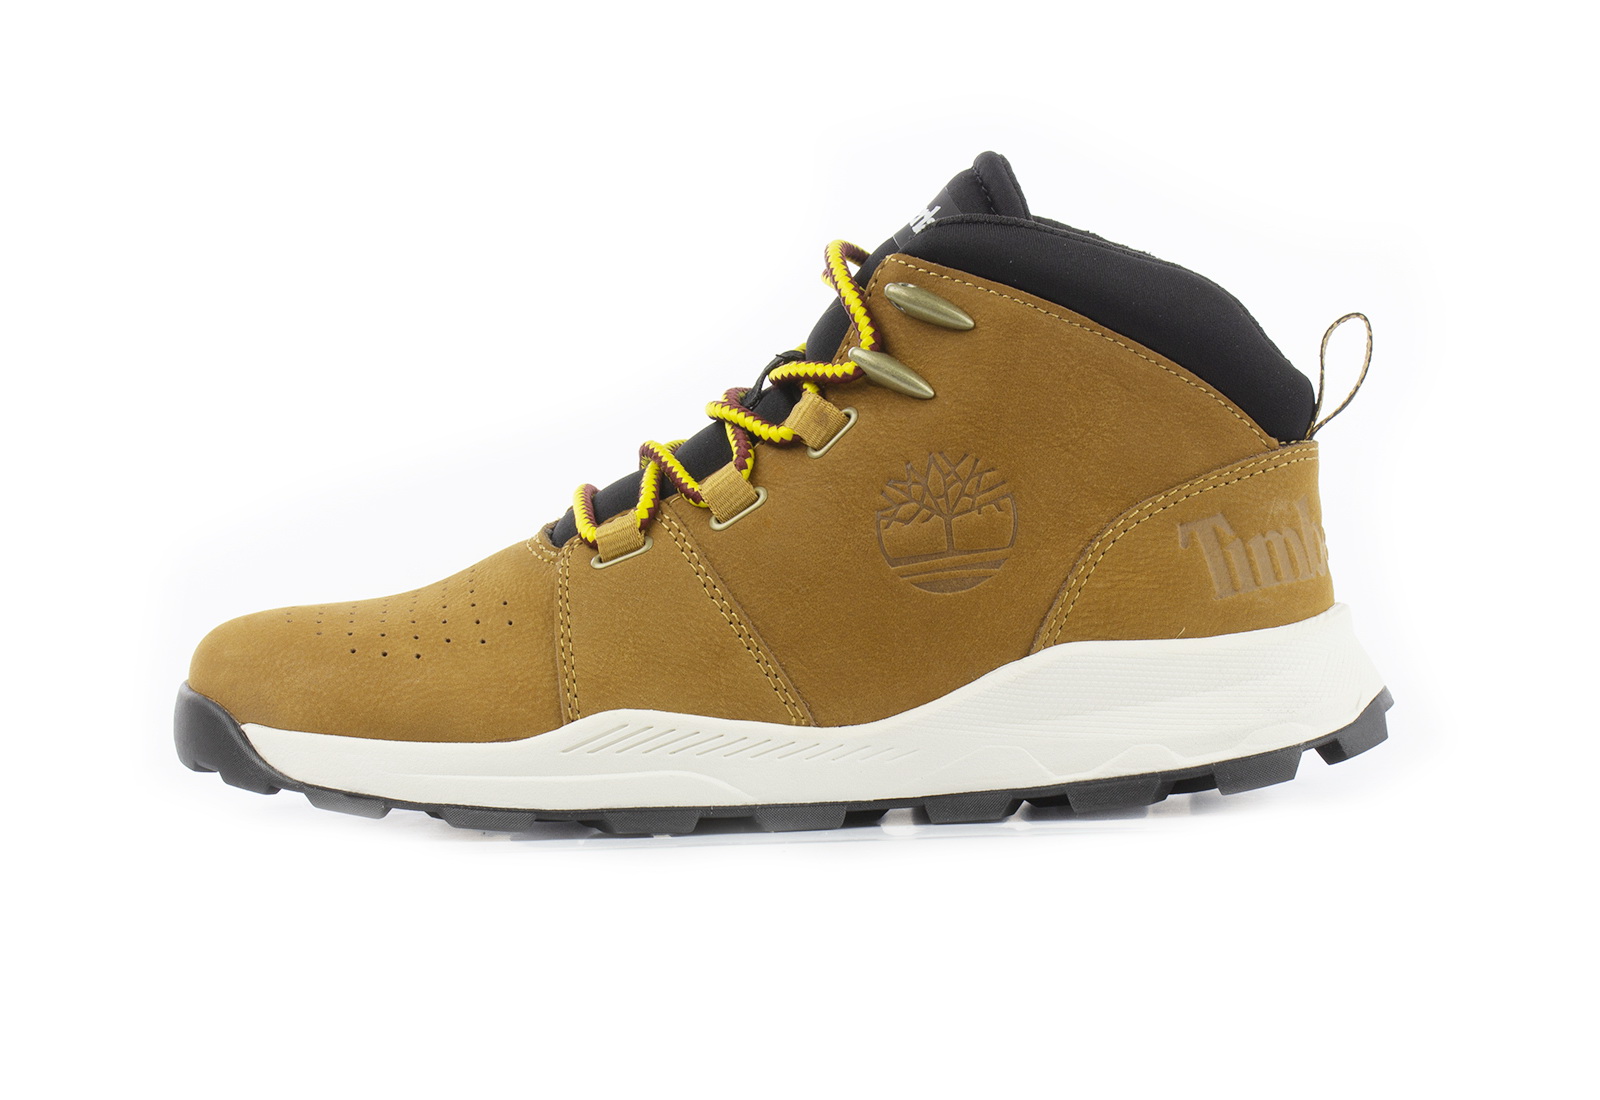 Fotoeléctrico parálisis Especial Timberland High sneakers - Brooklyn City Mid - A2933-brn - Online shop for  sneakers, shoes and boots